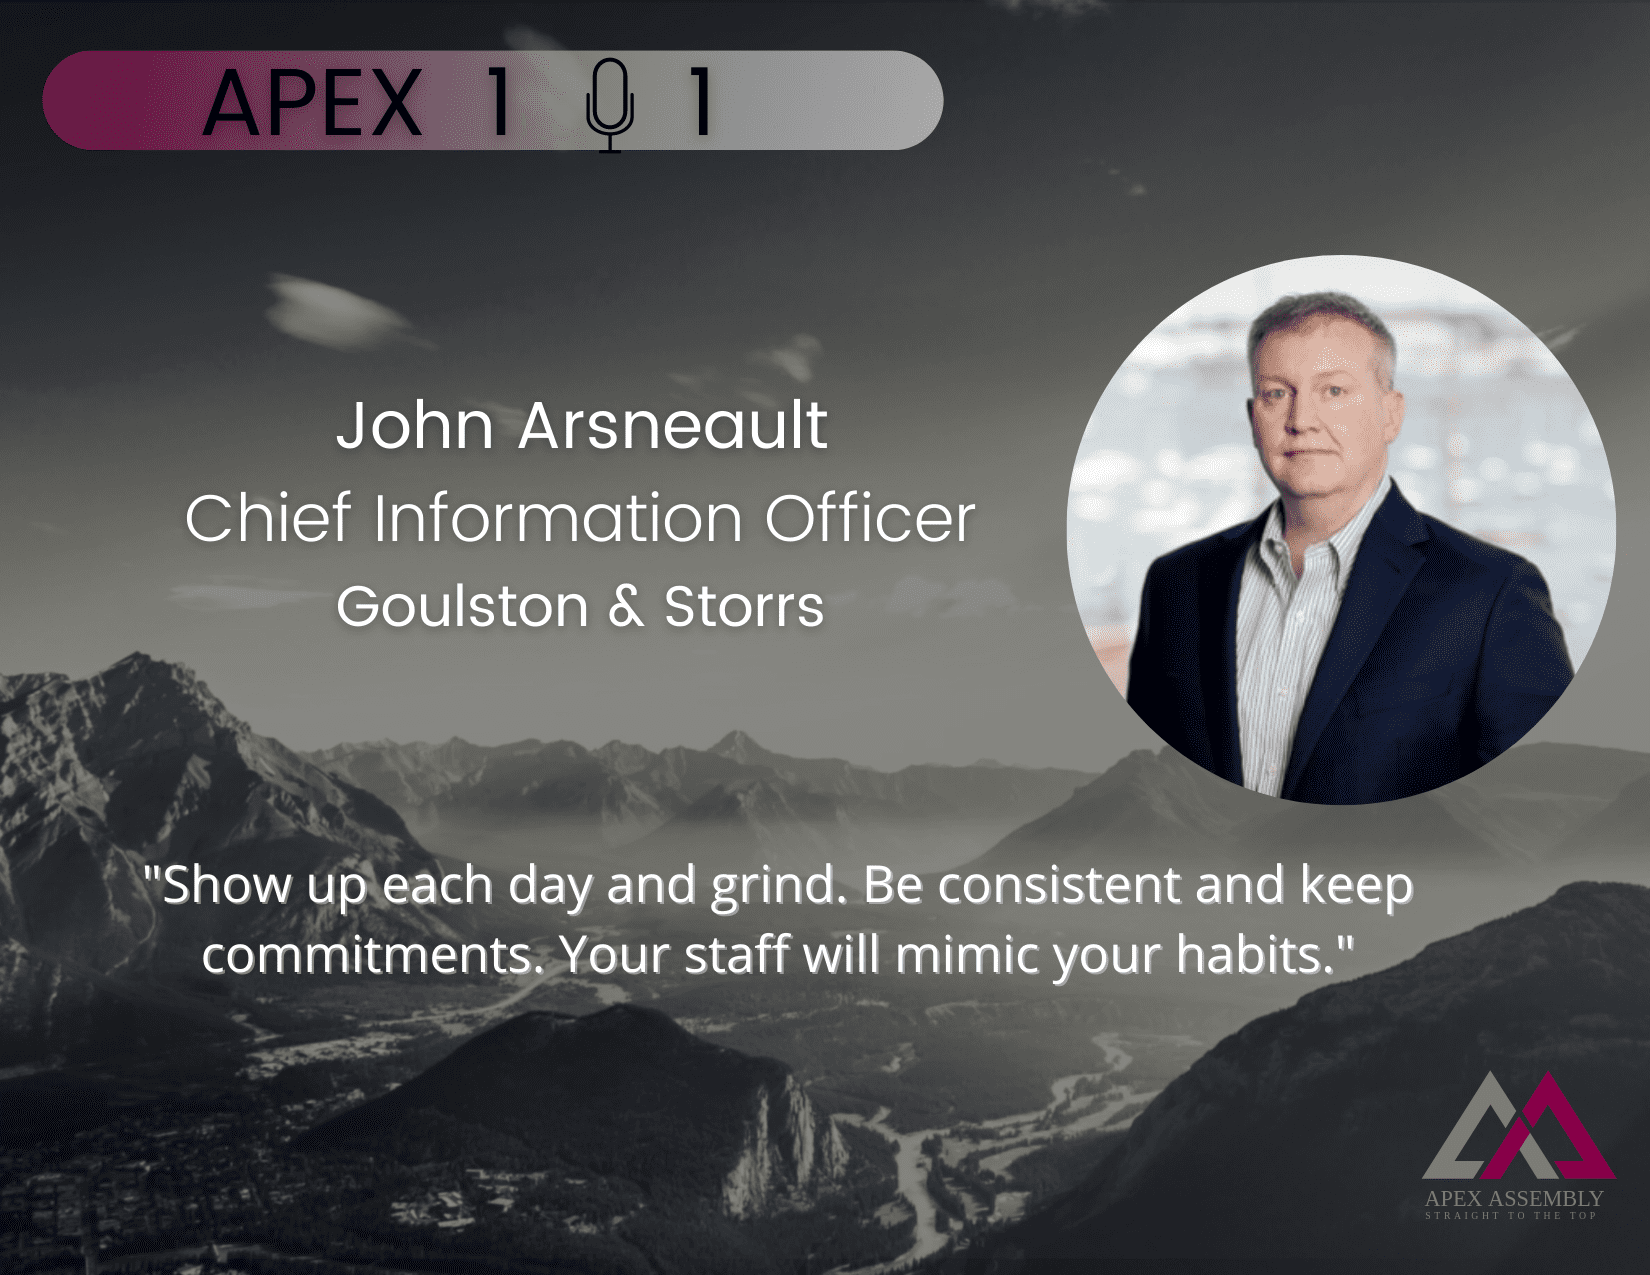 Apex 1 on 1 with John Arsneault: Insights from a CIO, venture capitalist and a startup advisor